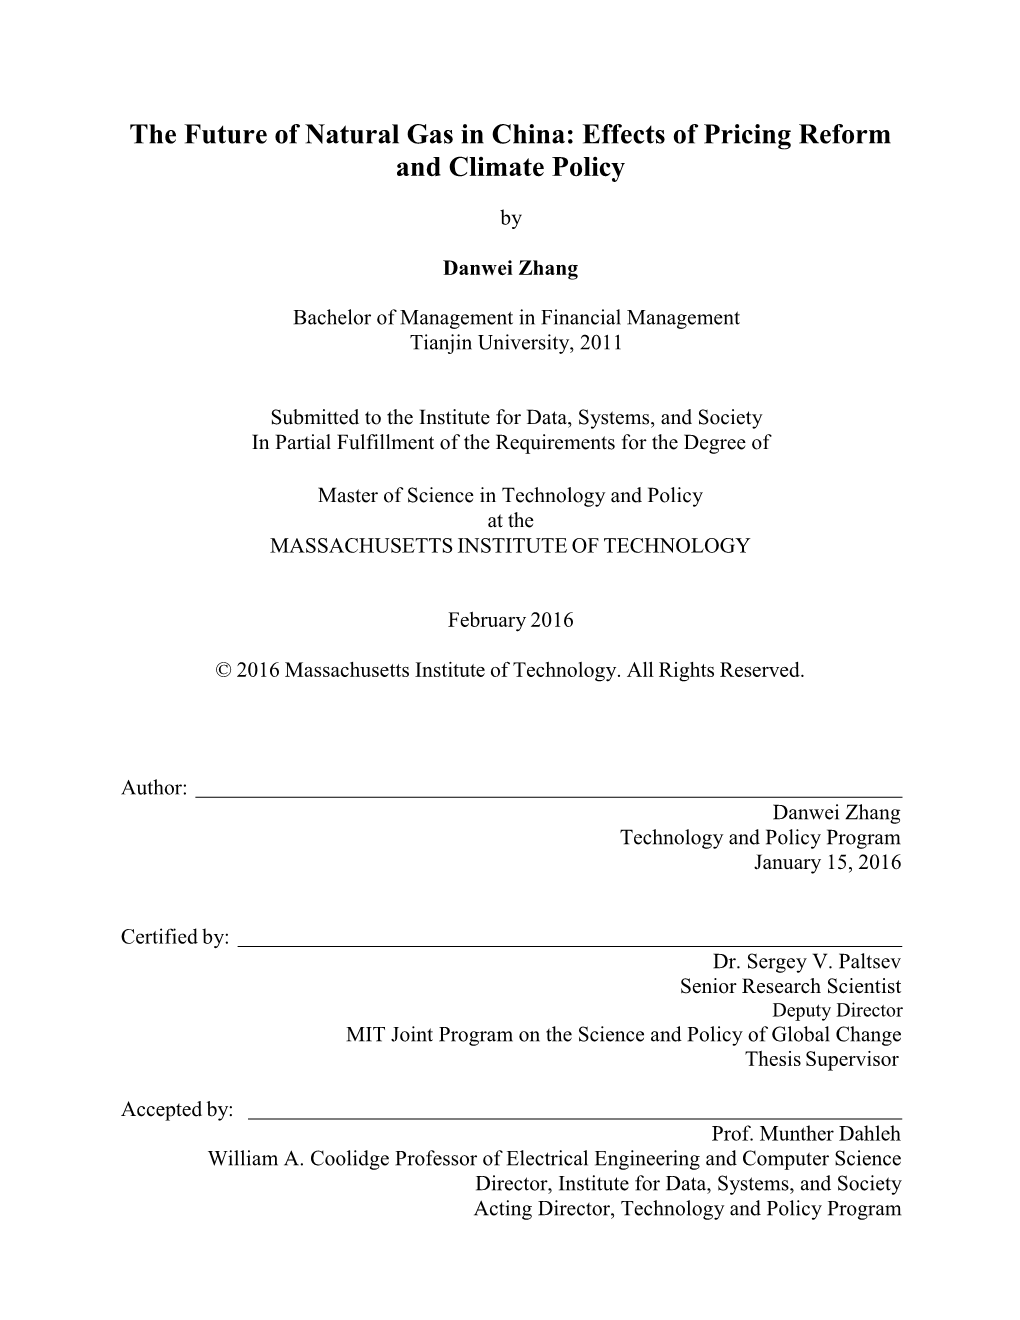 The Future of Natural Gas in China: Effects of Pricing Reform and Climate Policy